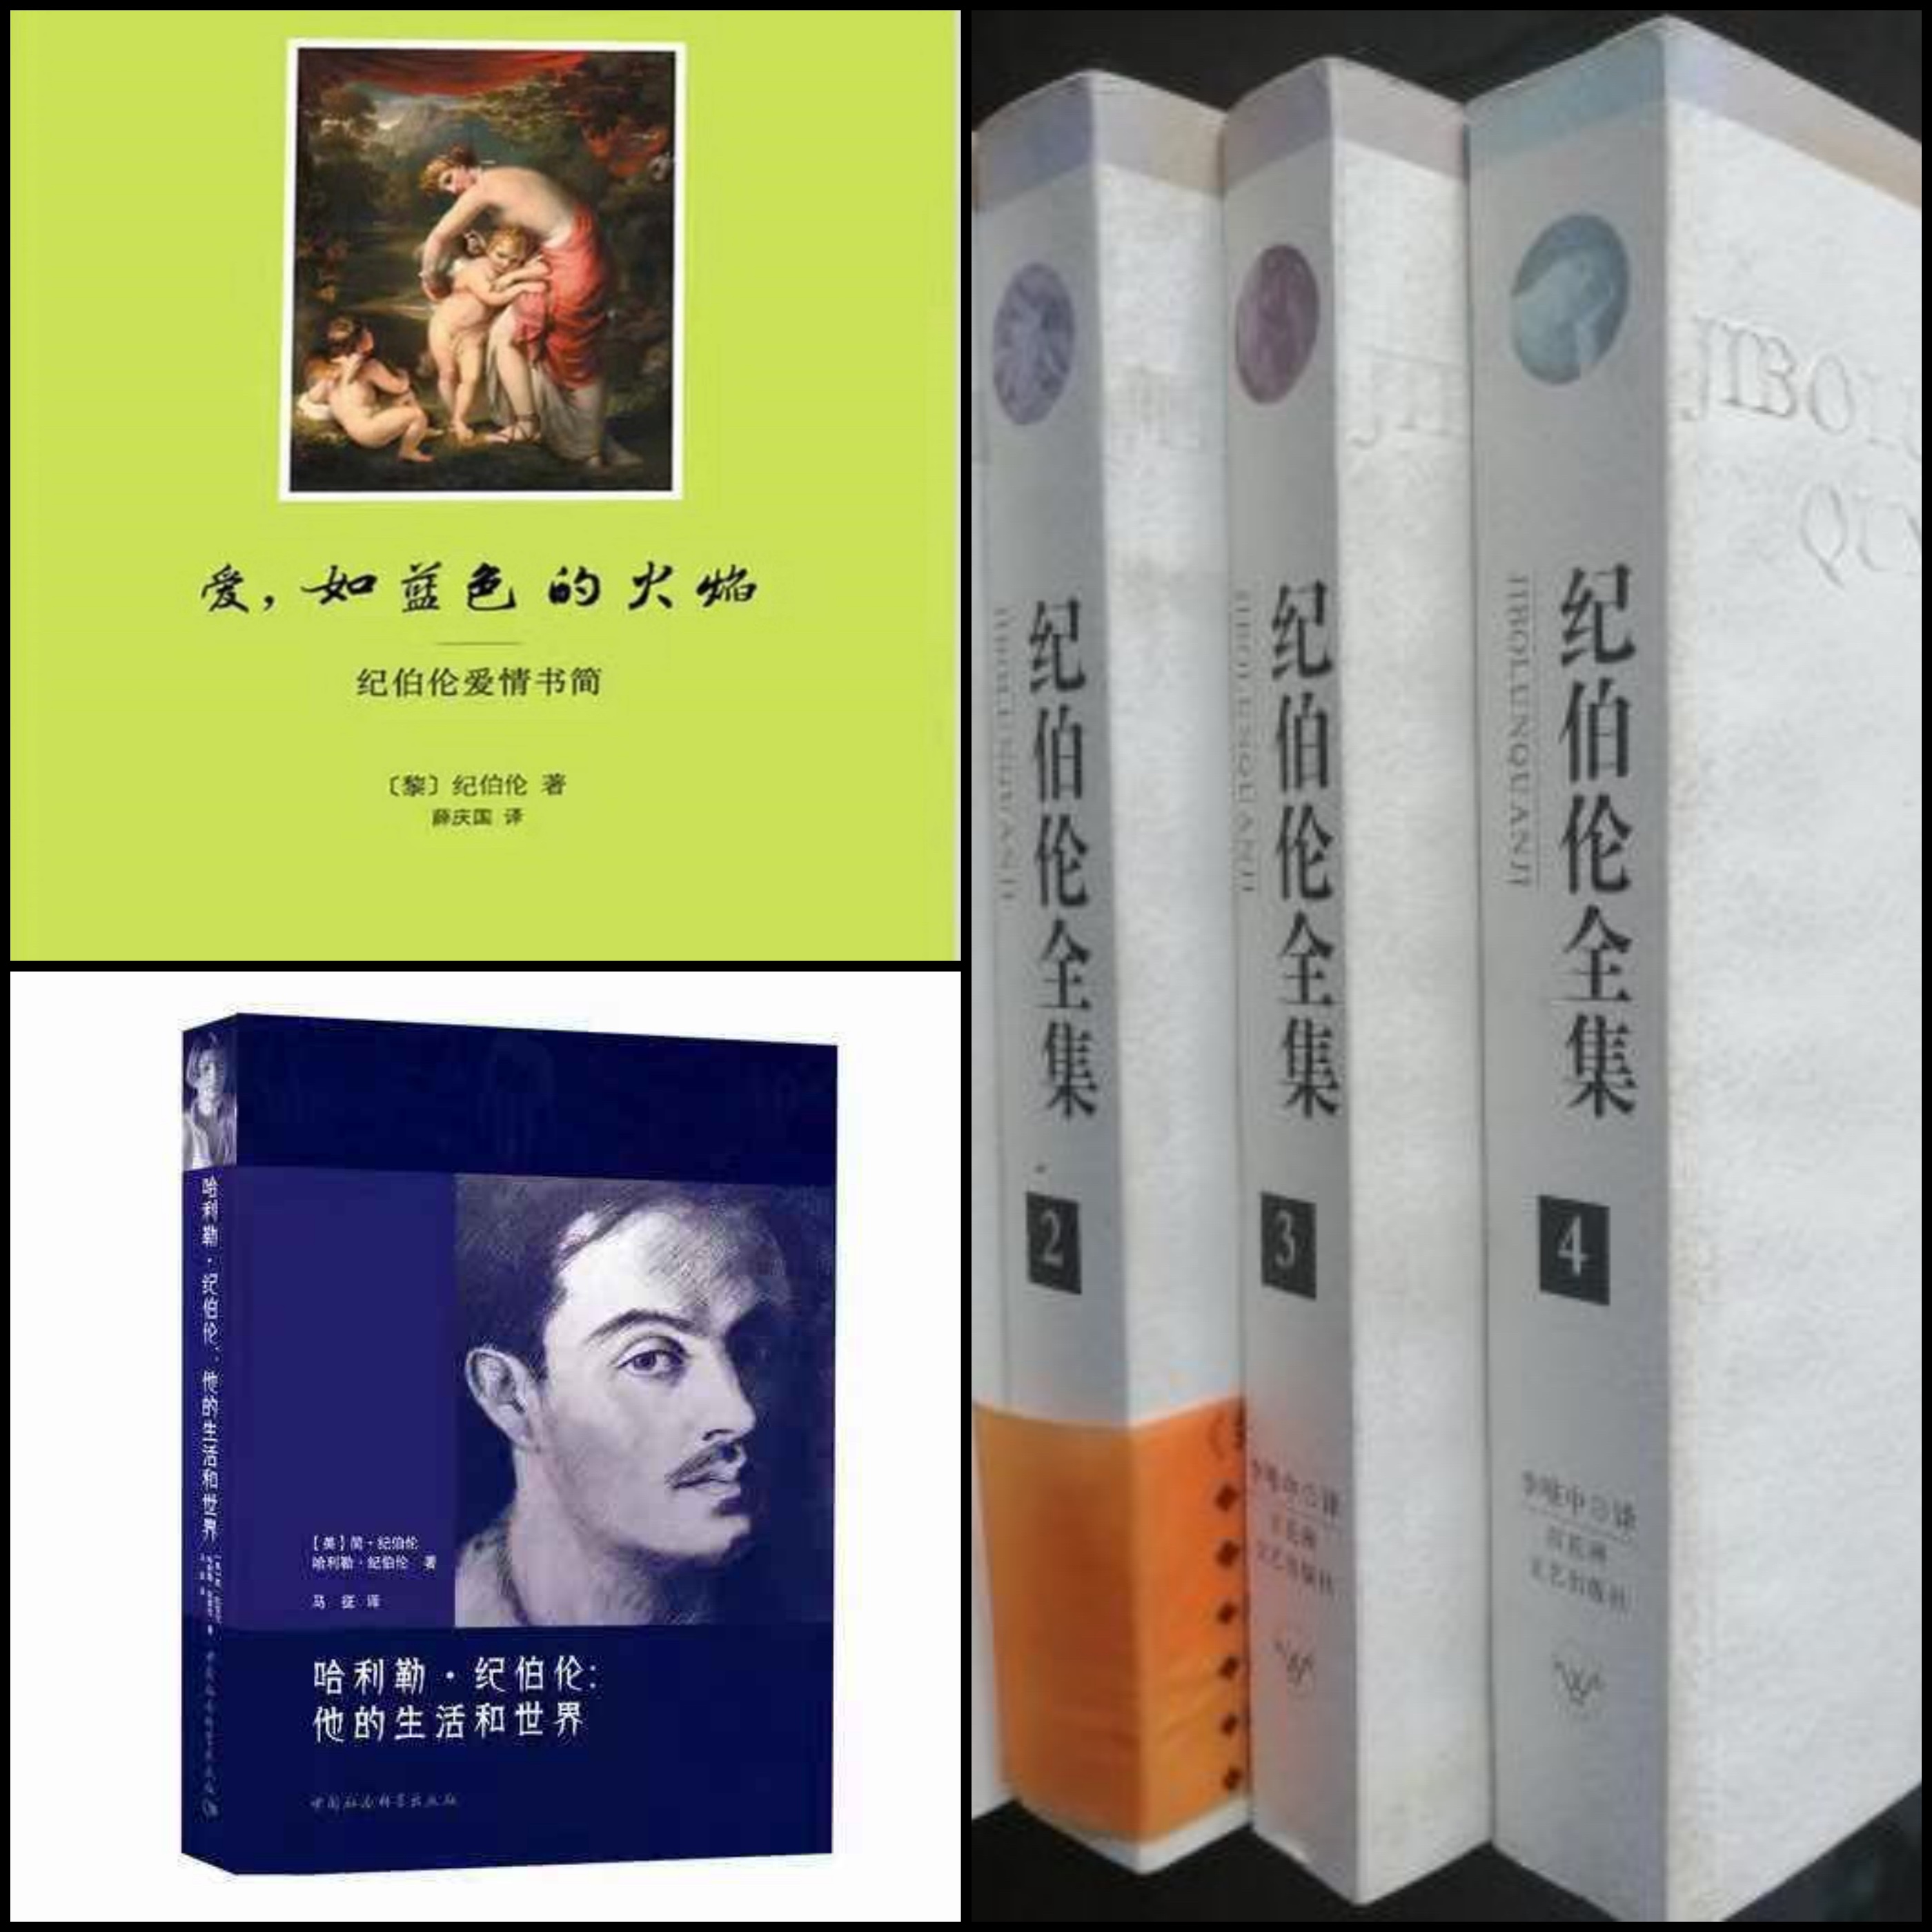 Gibran’s Love Letters（Qingguo Xue) 2001, Kahlil Gibran：His Life and World (Zheng Ma) 2016, The Complete Works of Gibran (Weizhong Li) 2007, 